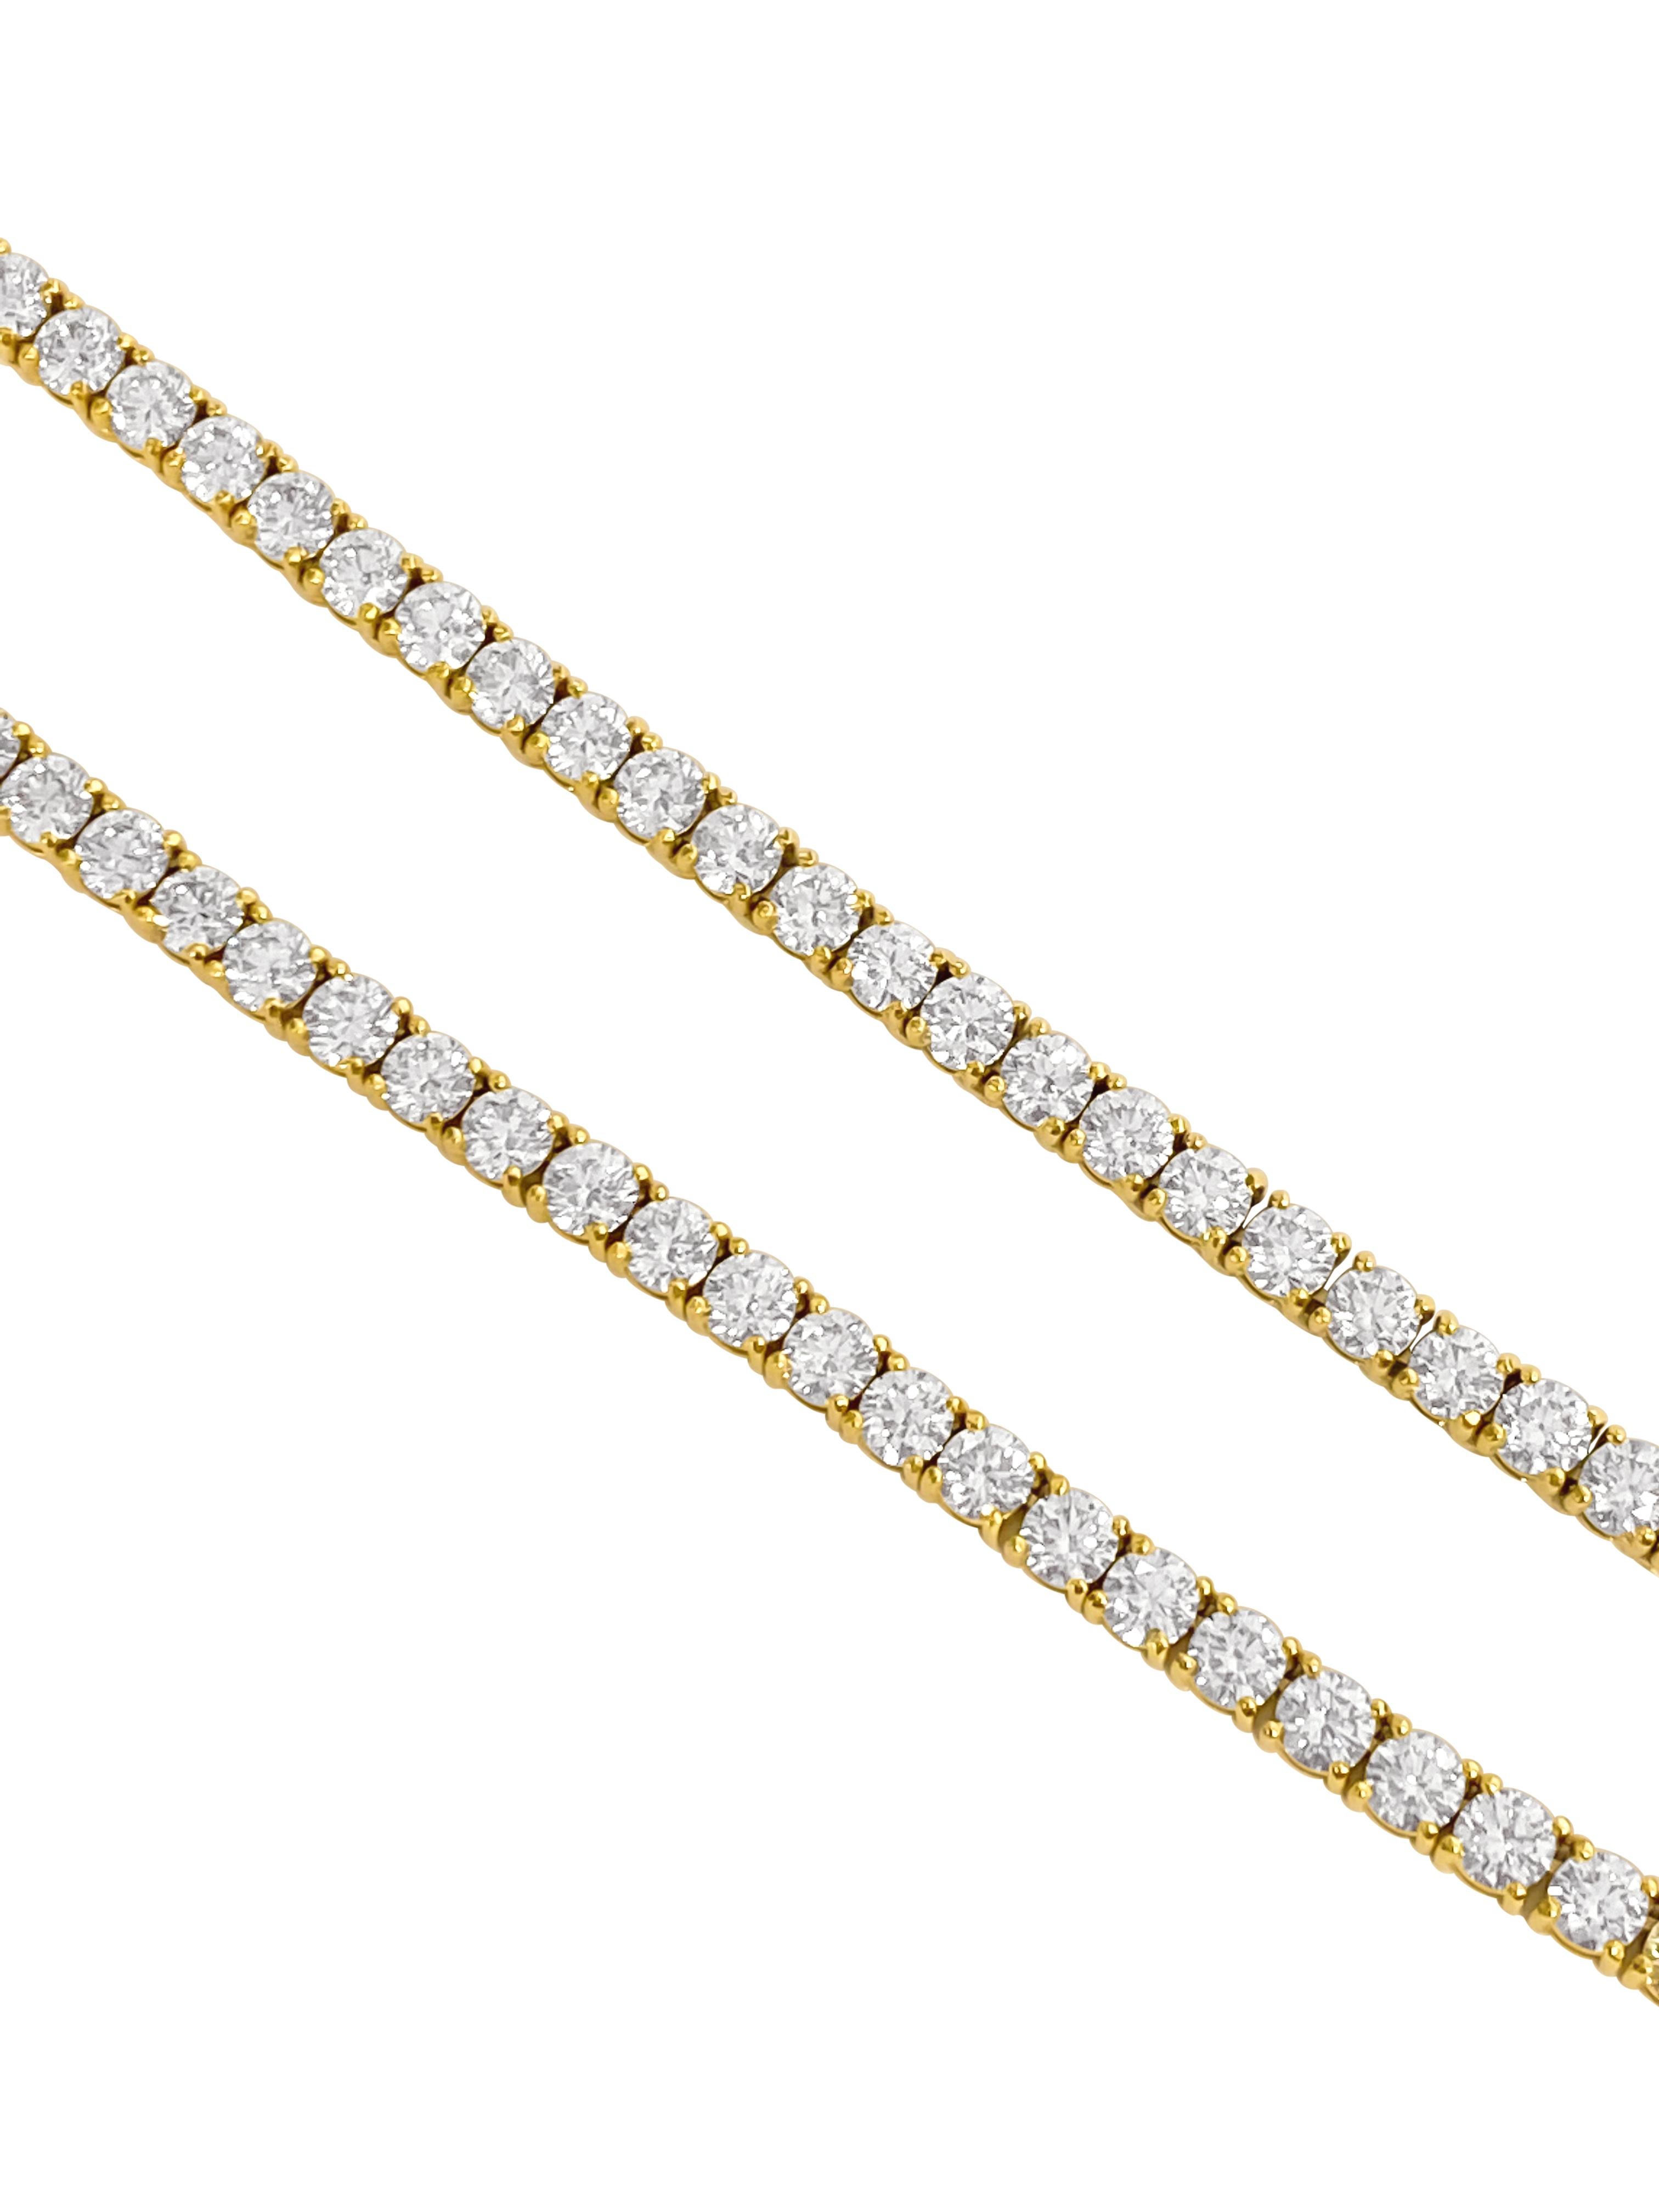 Metal: 14k Yellow Gold

Diamonds: 14.50 Carat Weight Total
148 stones total. 
VVS clarity 
Round brilliant cut diamonds.

20 inch tennis necklace. 

Gorgeous classic diamond tennis necklace. Excellent luster and shine. 

Unisex diamond jewelry